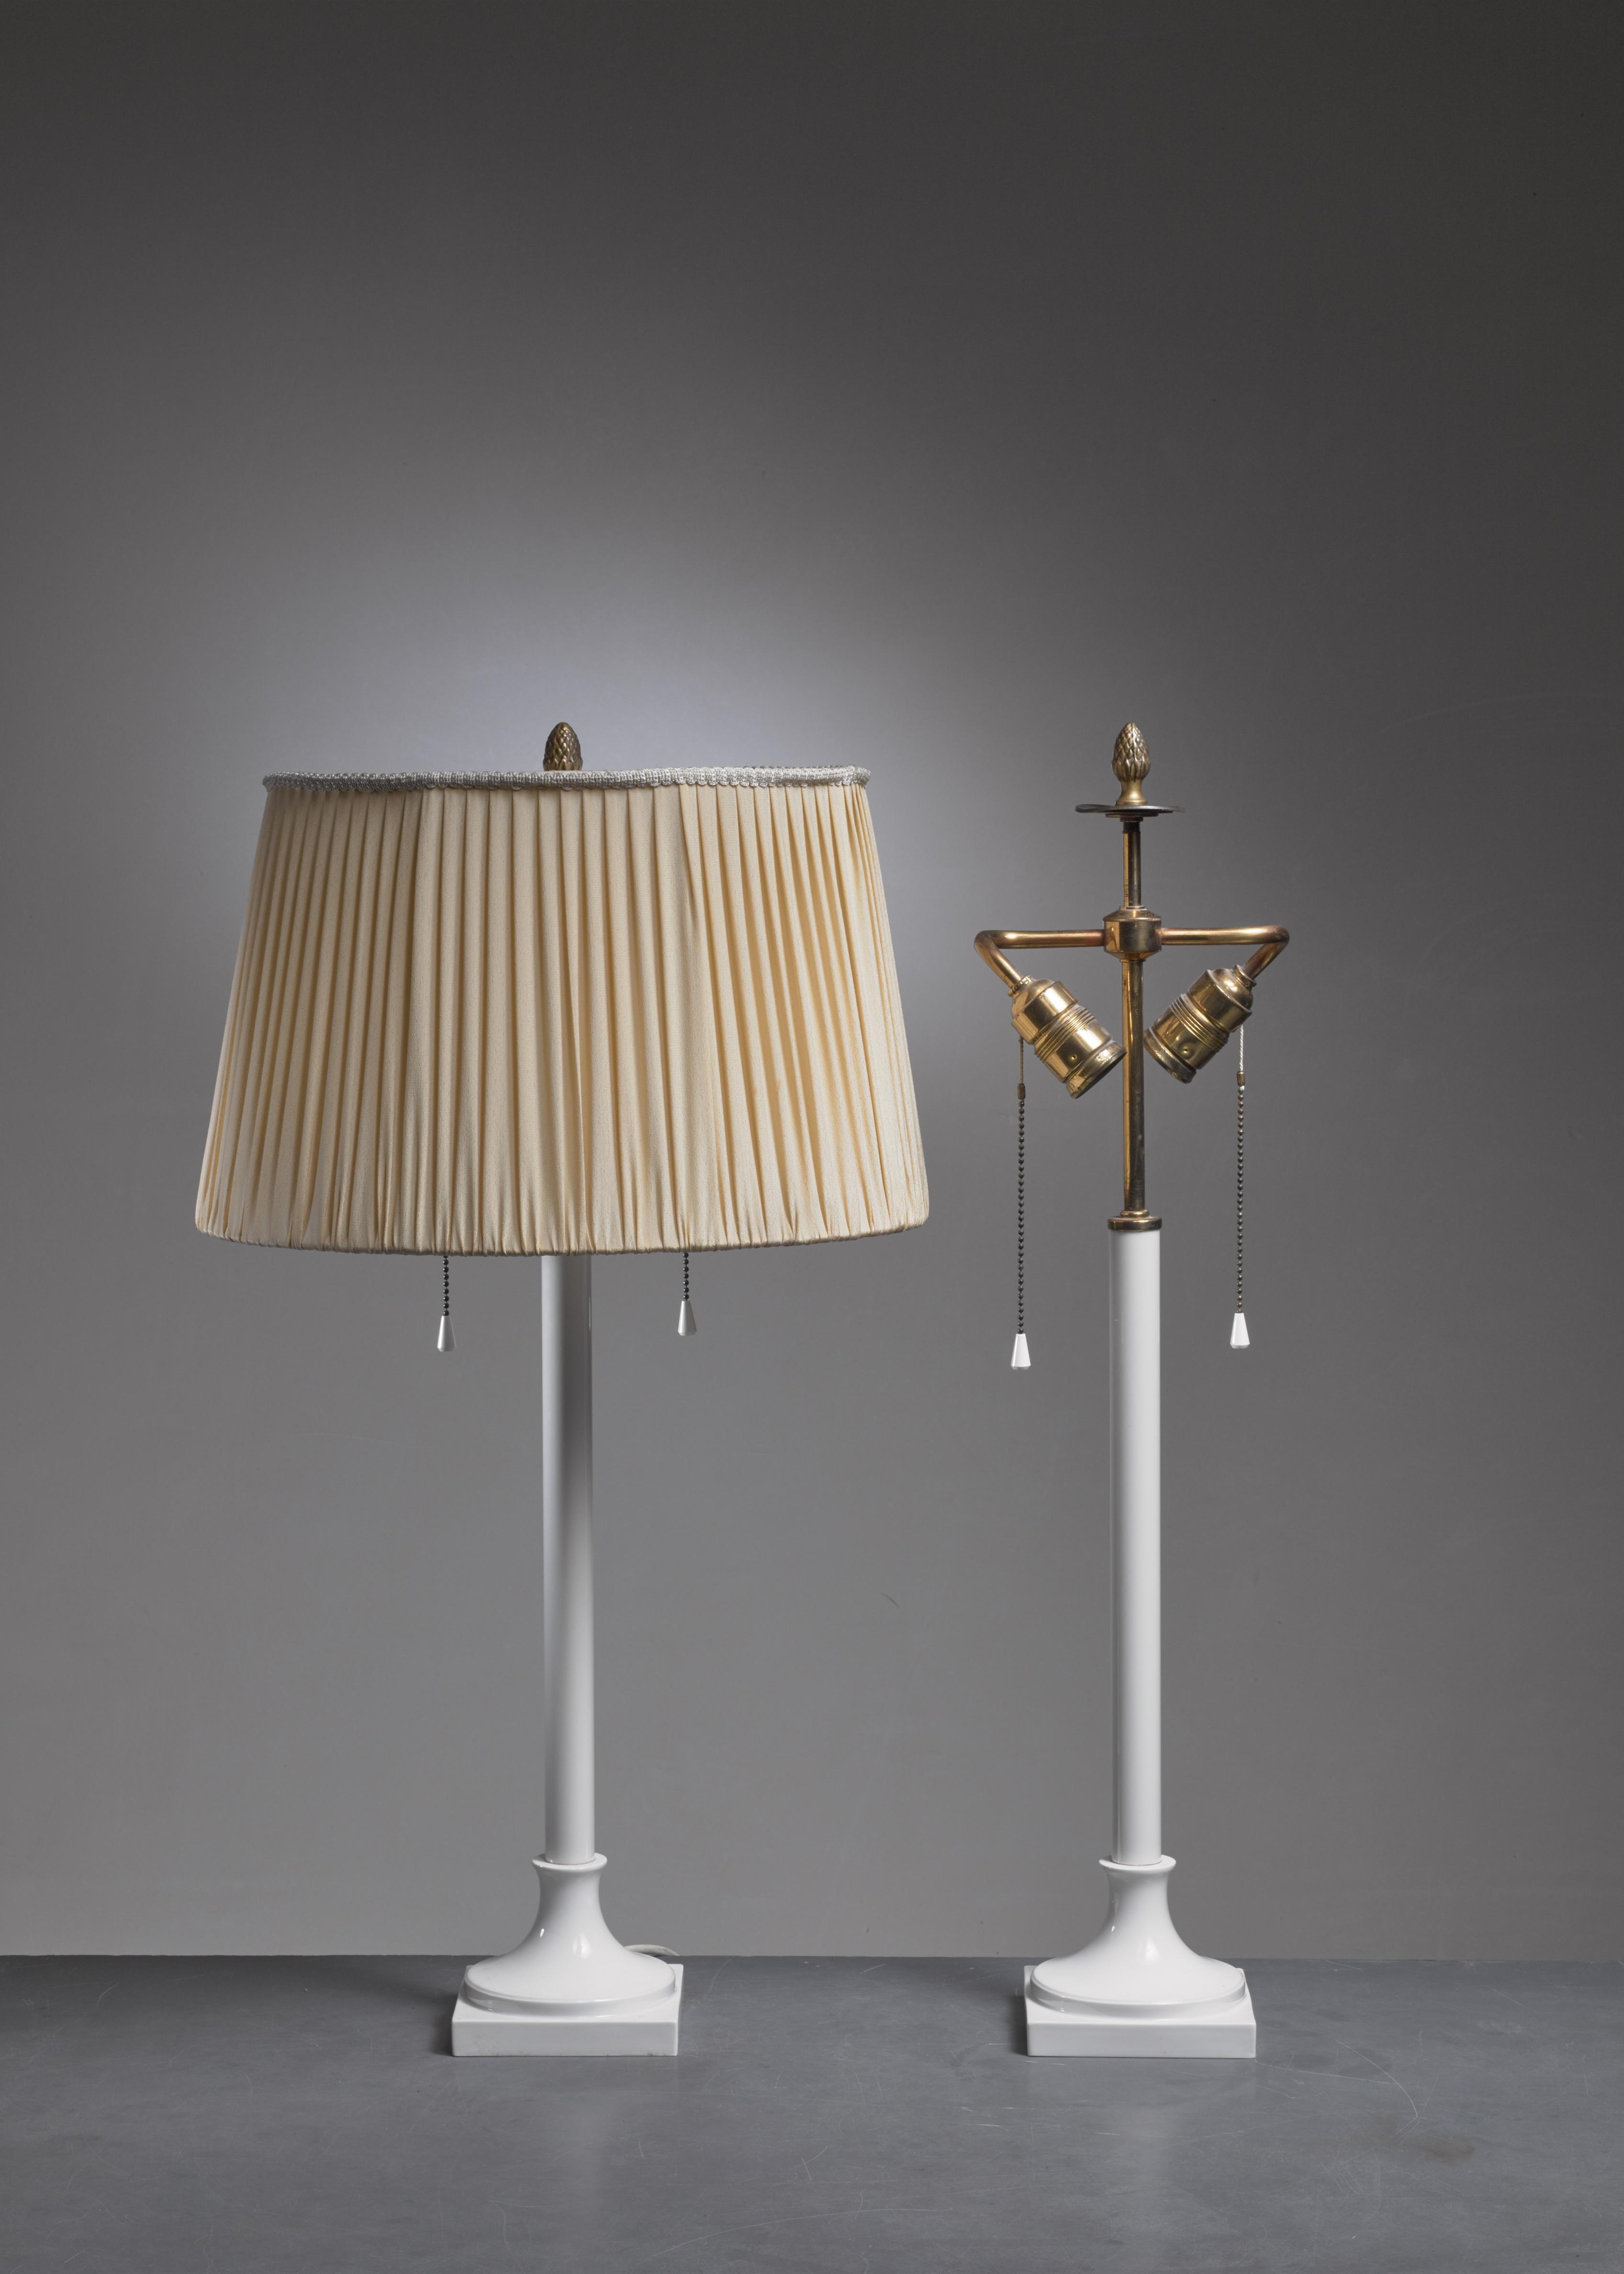 A pair of white porcelain table lamps, designed by Alice von Pechmann for KPM Berlin. The lamp has two fittings and a brass pinecone decoration on top.

The measurements, price and shipment costs stated are of the bases without a shade.
